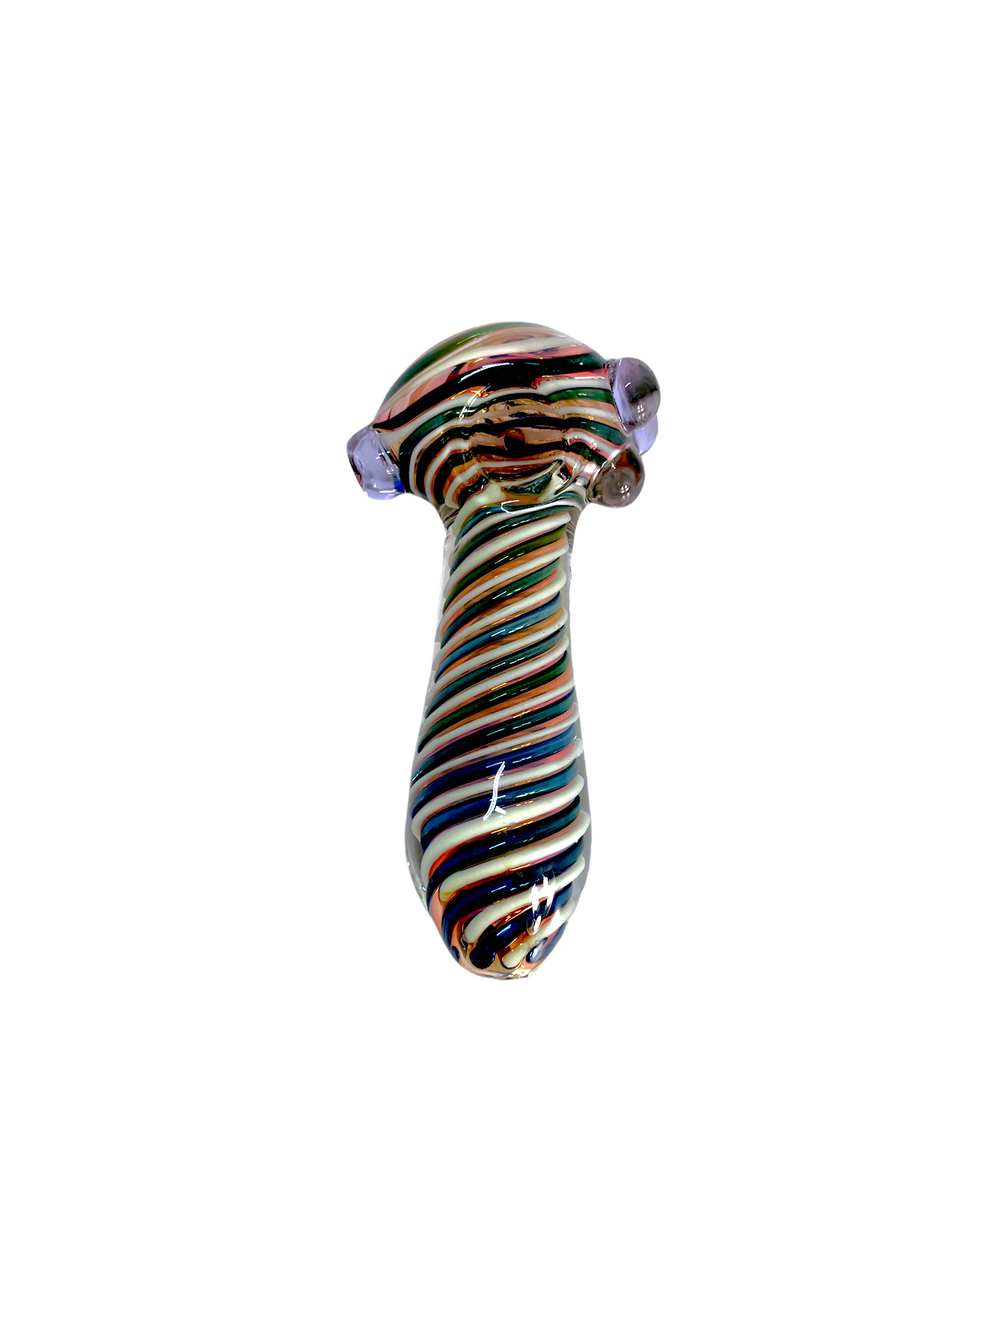 5" Fumed Inside Out Heavy Glass Hand Pipe